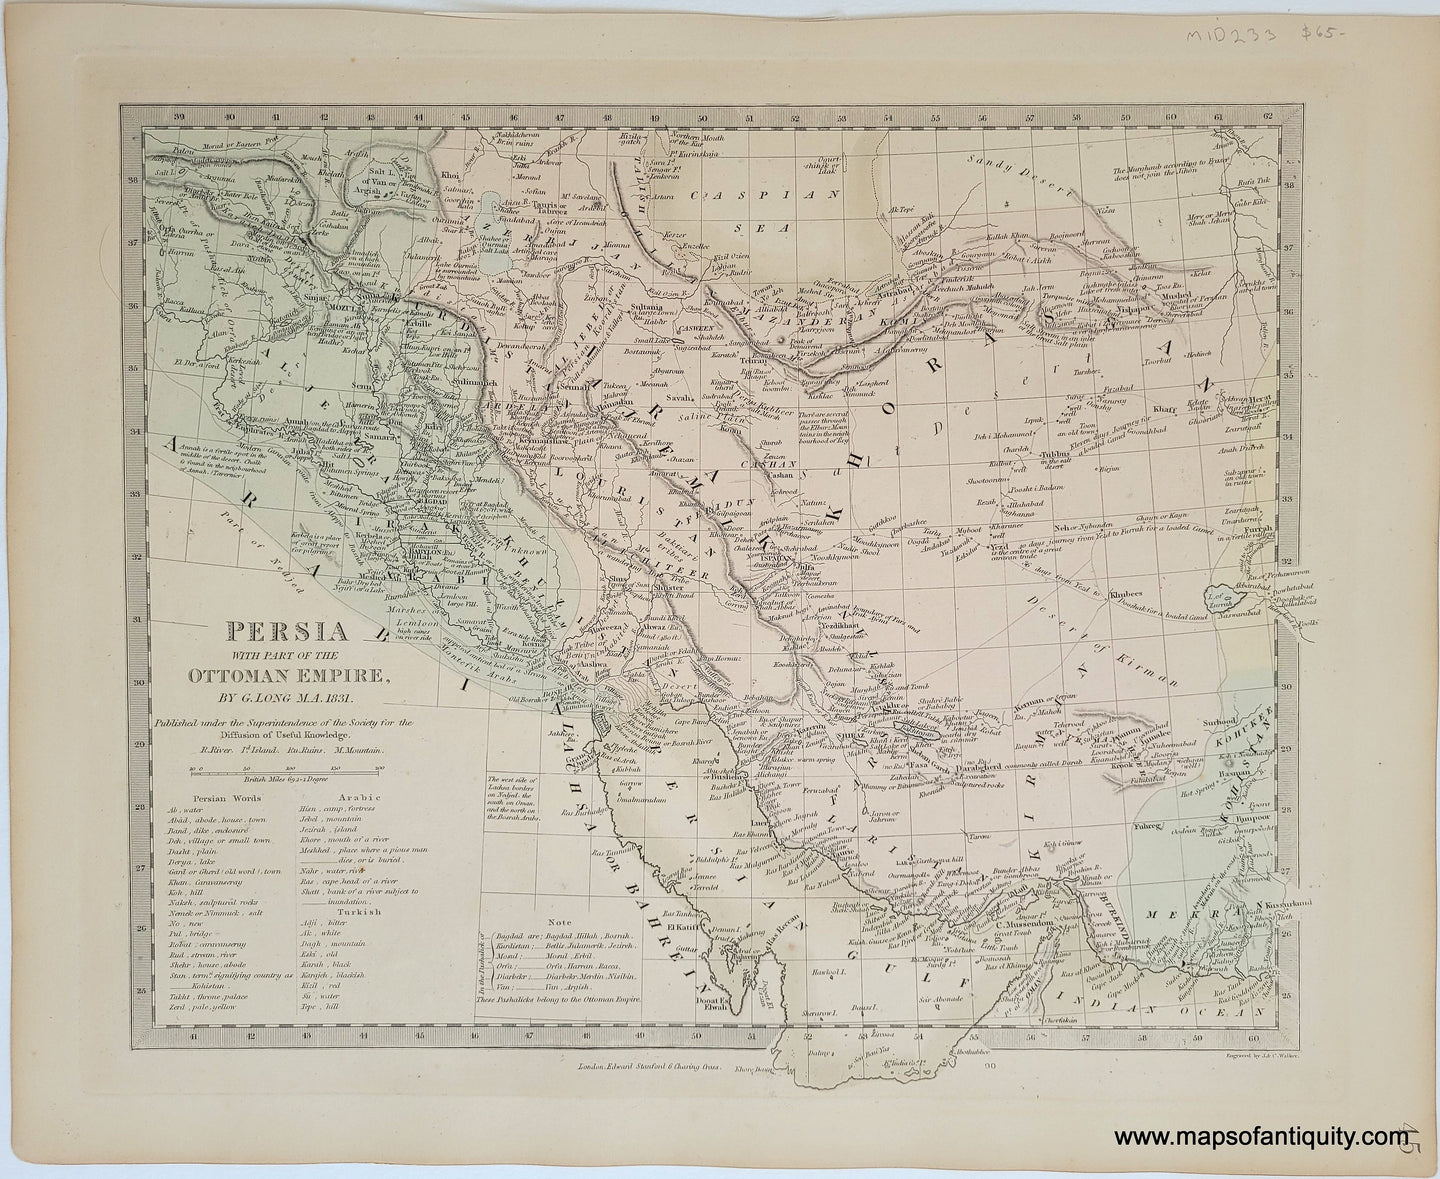 Genuine-Antique-Map-Persia-with-part-of-the-Ottoman-Empire-Middle-East-Holy-Land--1860-SDUK-Society-for-the-Diffusion-of-Useful-Knowledge-Maps-Of-Antiquity-1800s-19th-century